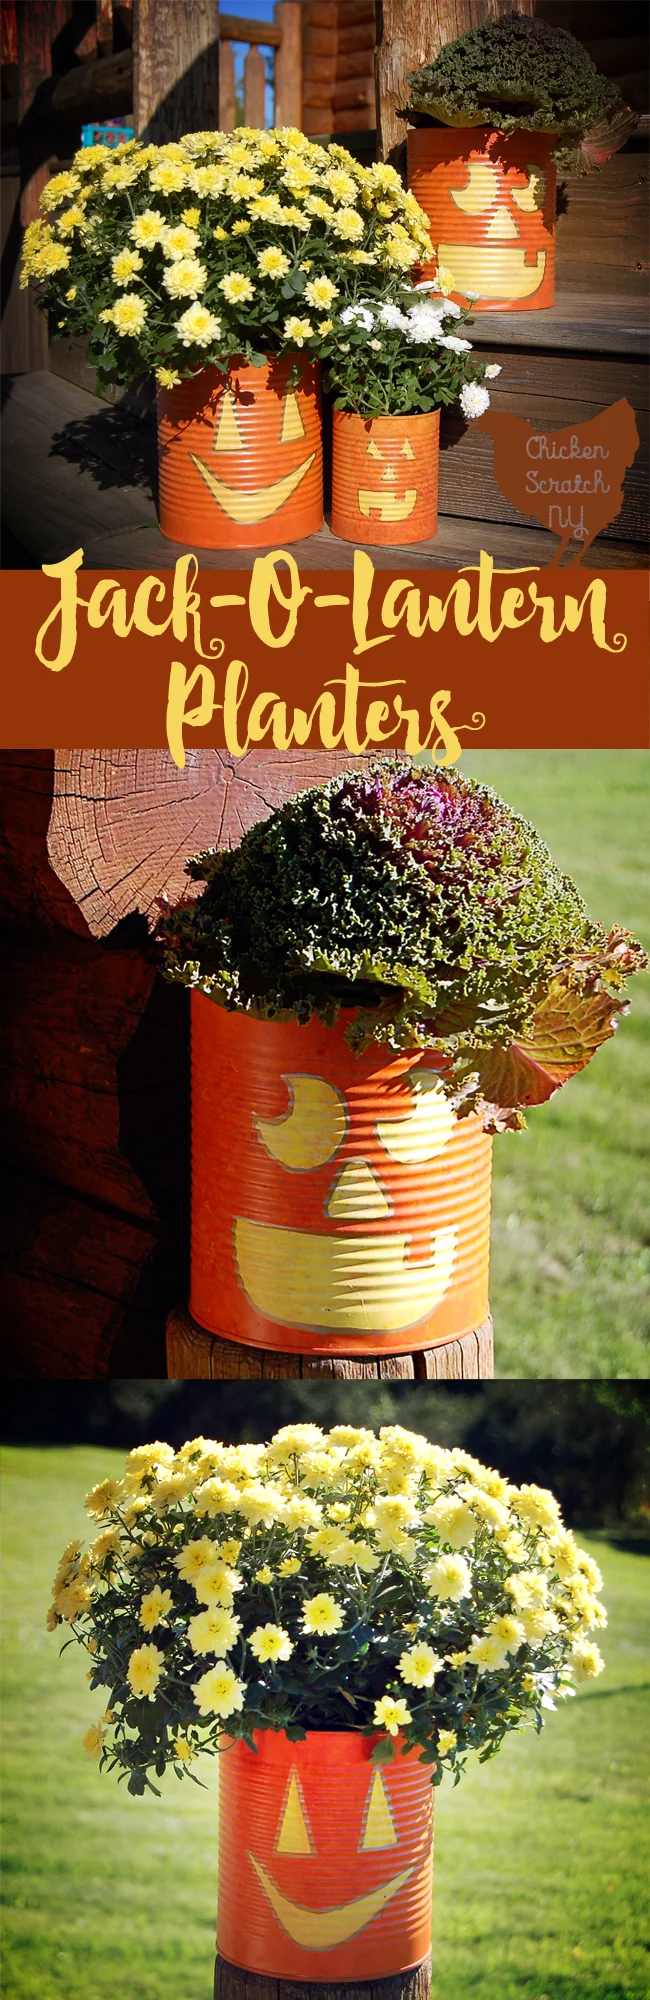 Whip up a set of Jack-O-Lantern Planters from tin cans this fall. Fill them with seasonal flowers for a fun pop of color on your front porch.